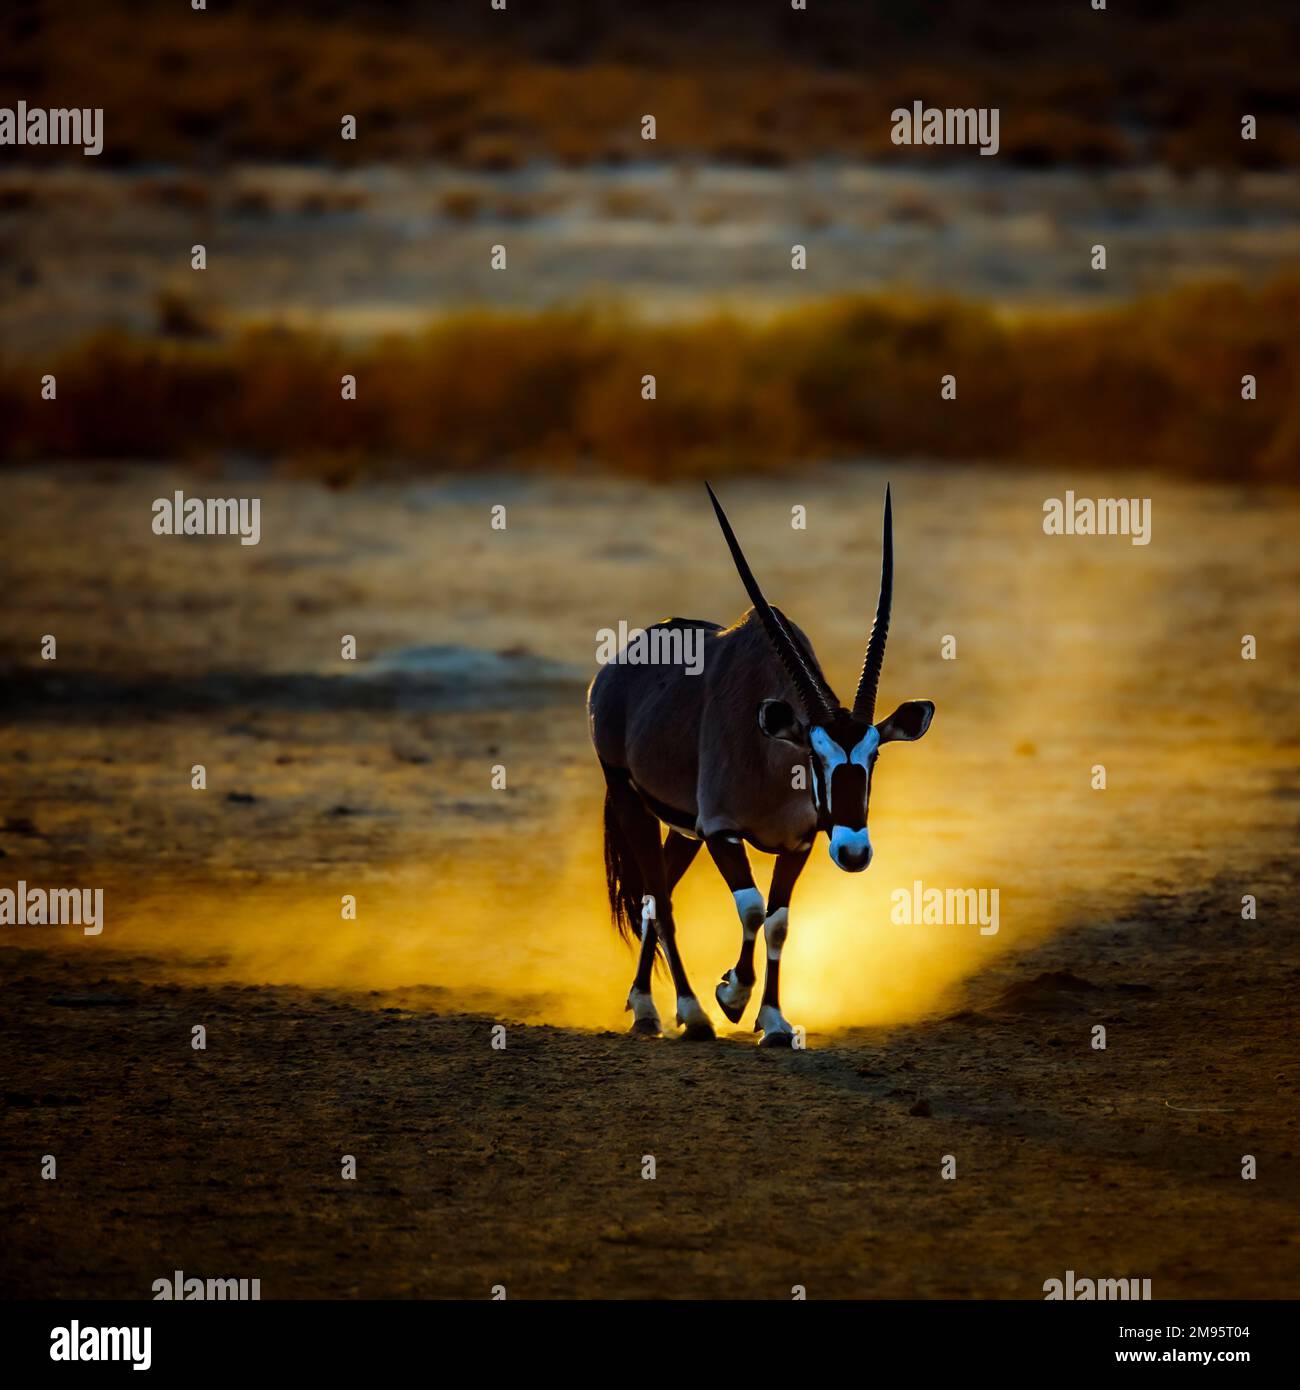 South African Oryx walking front view in sand at sunset in Kgalagadi transfrontier park, South Africa; specie Oryx gazella family of Bovidae Stock Photo